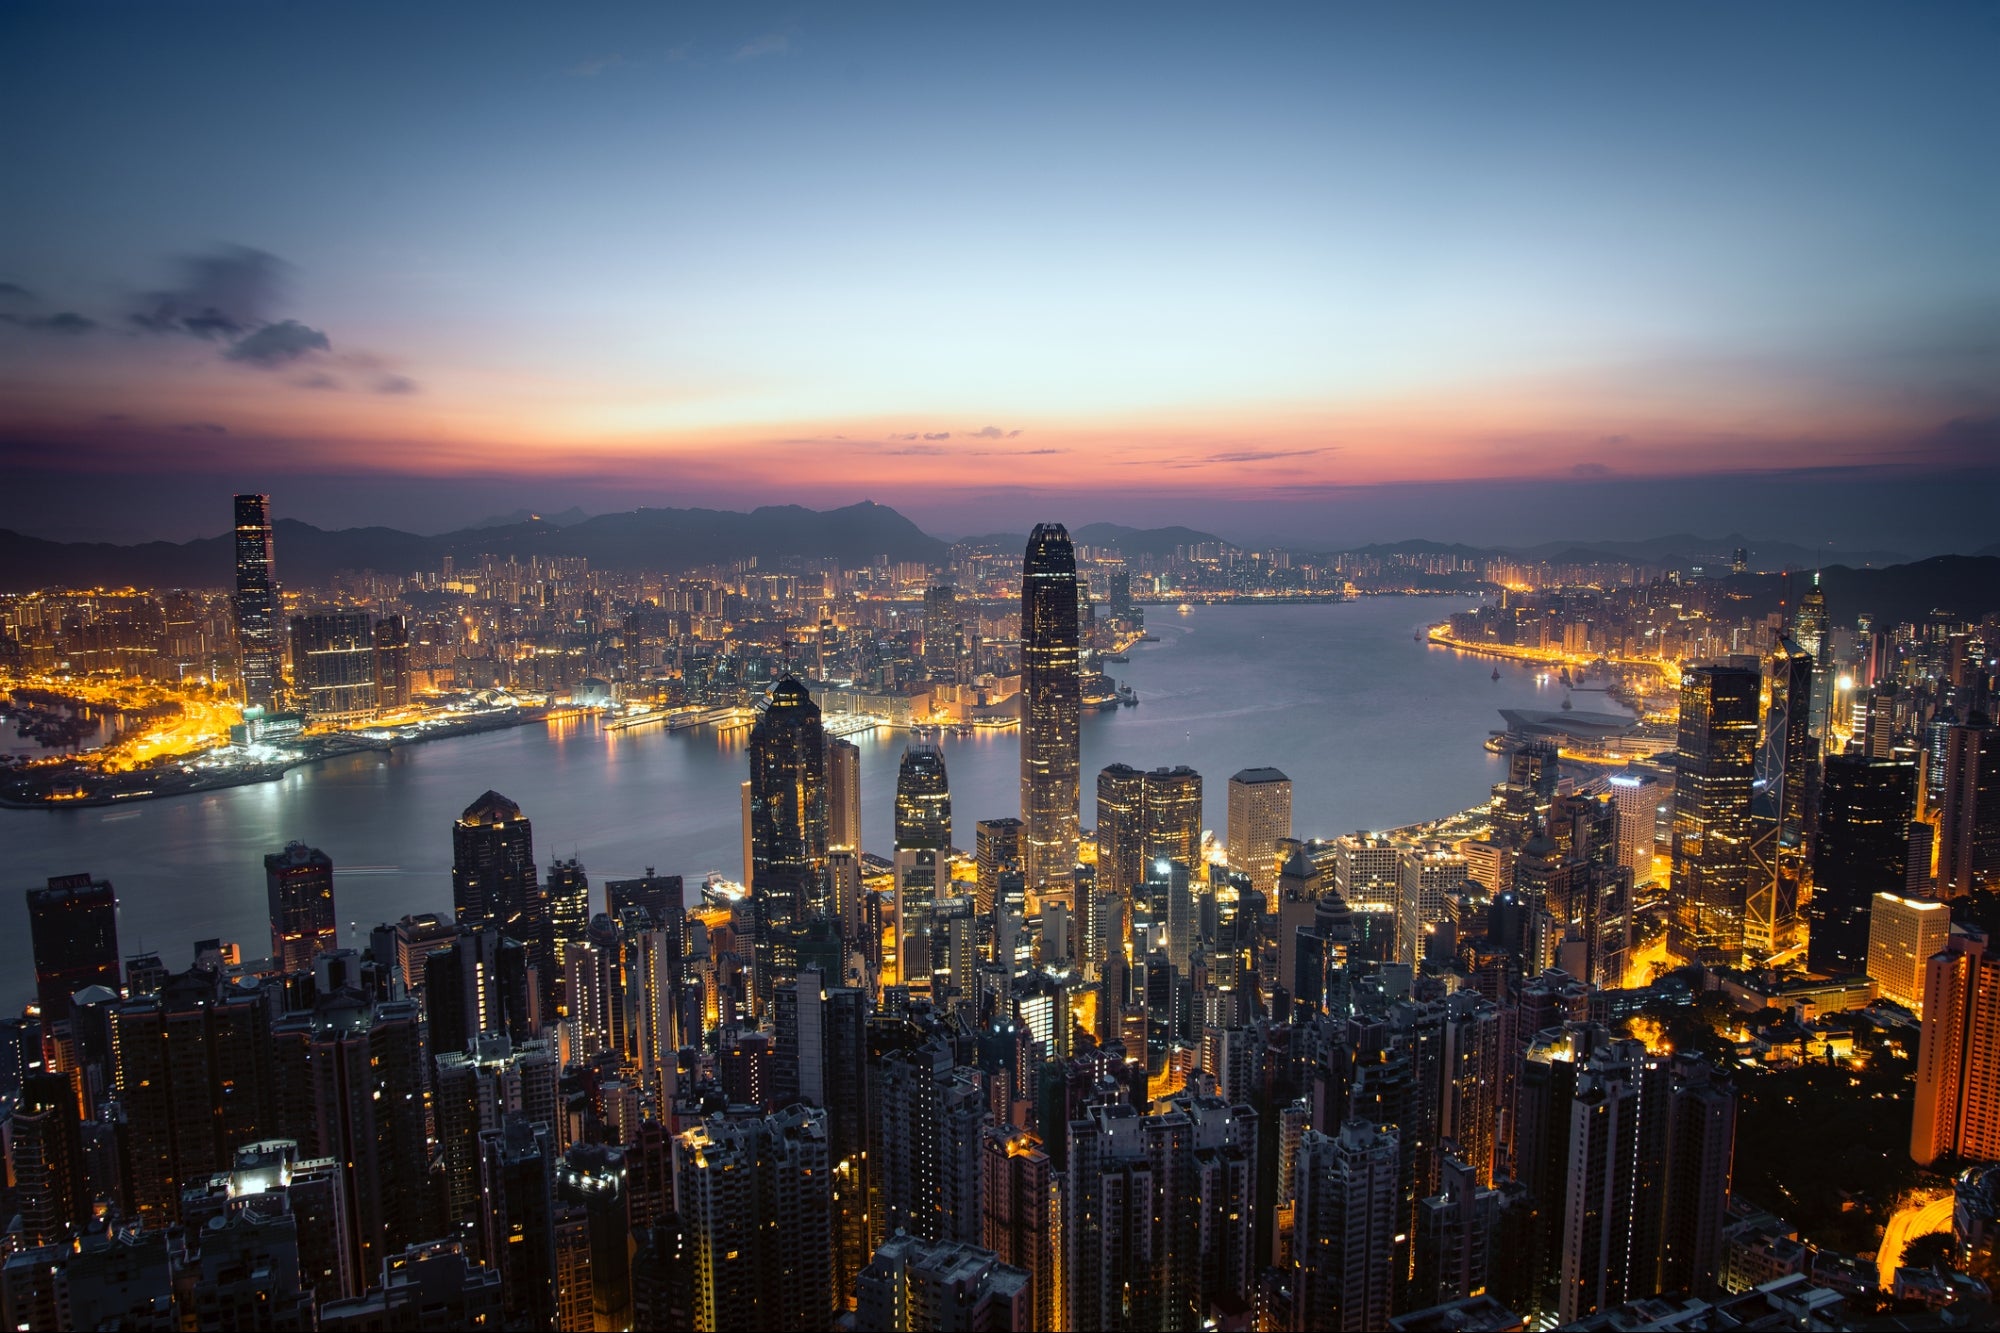 7 Reasons Why Hong Kong is Still Asia's No. 1 Spot for International Business